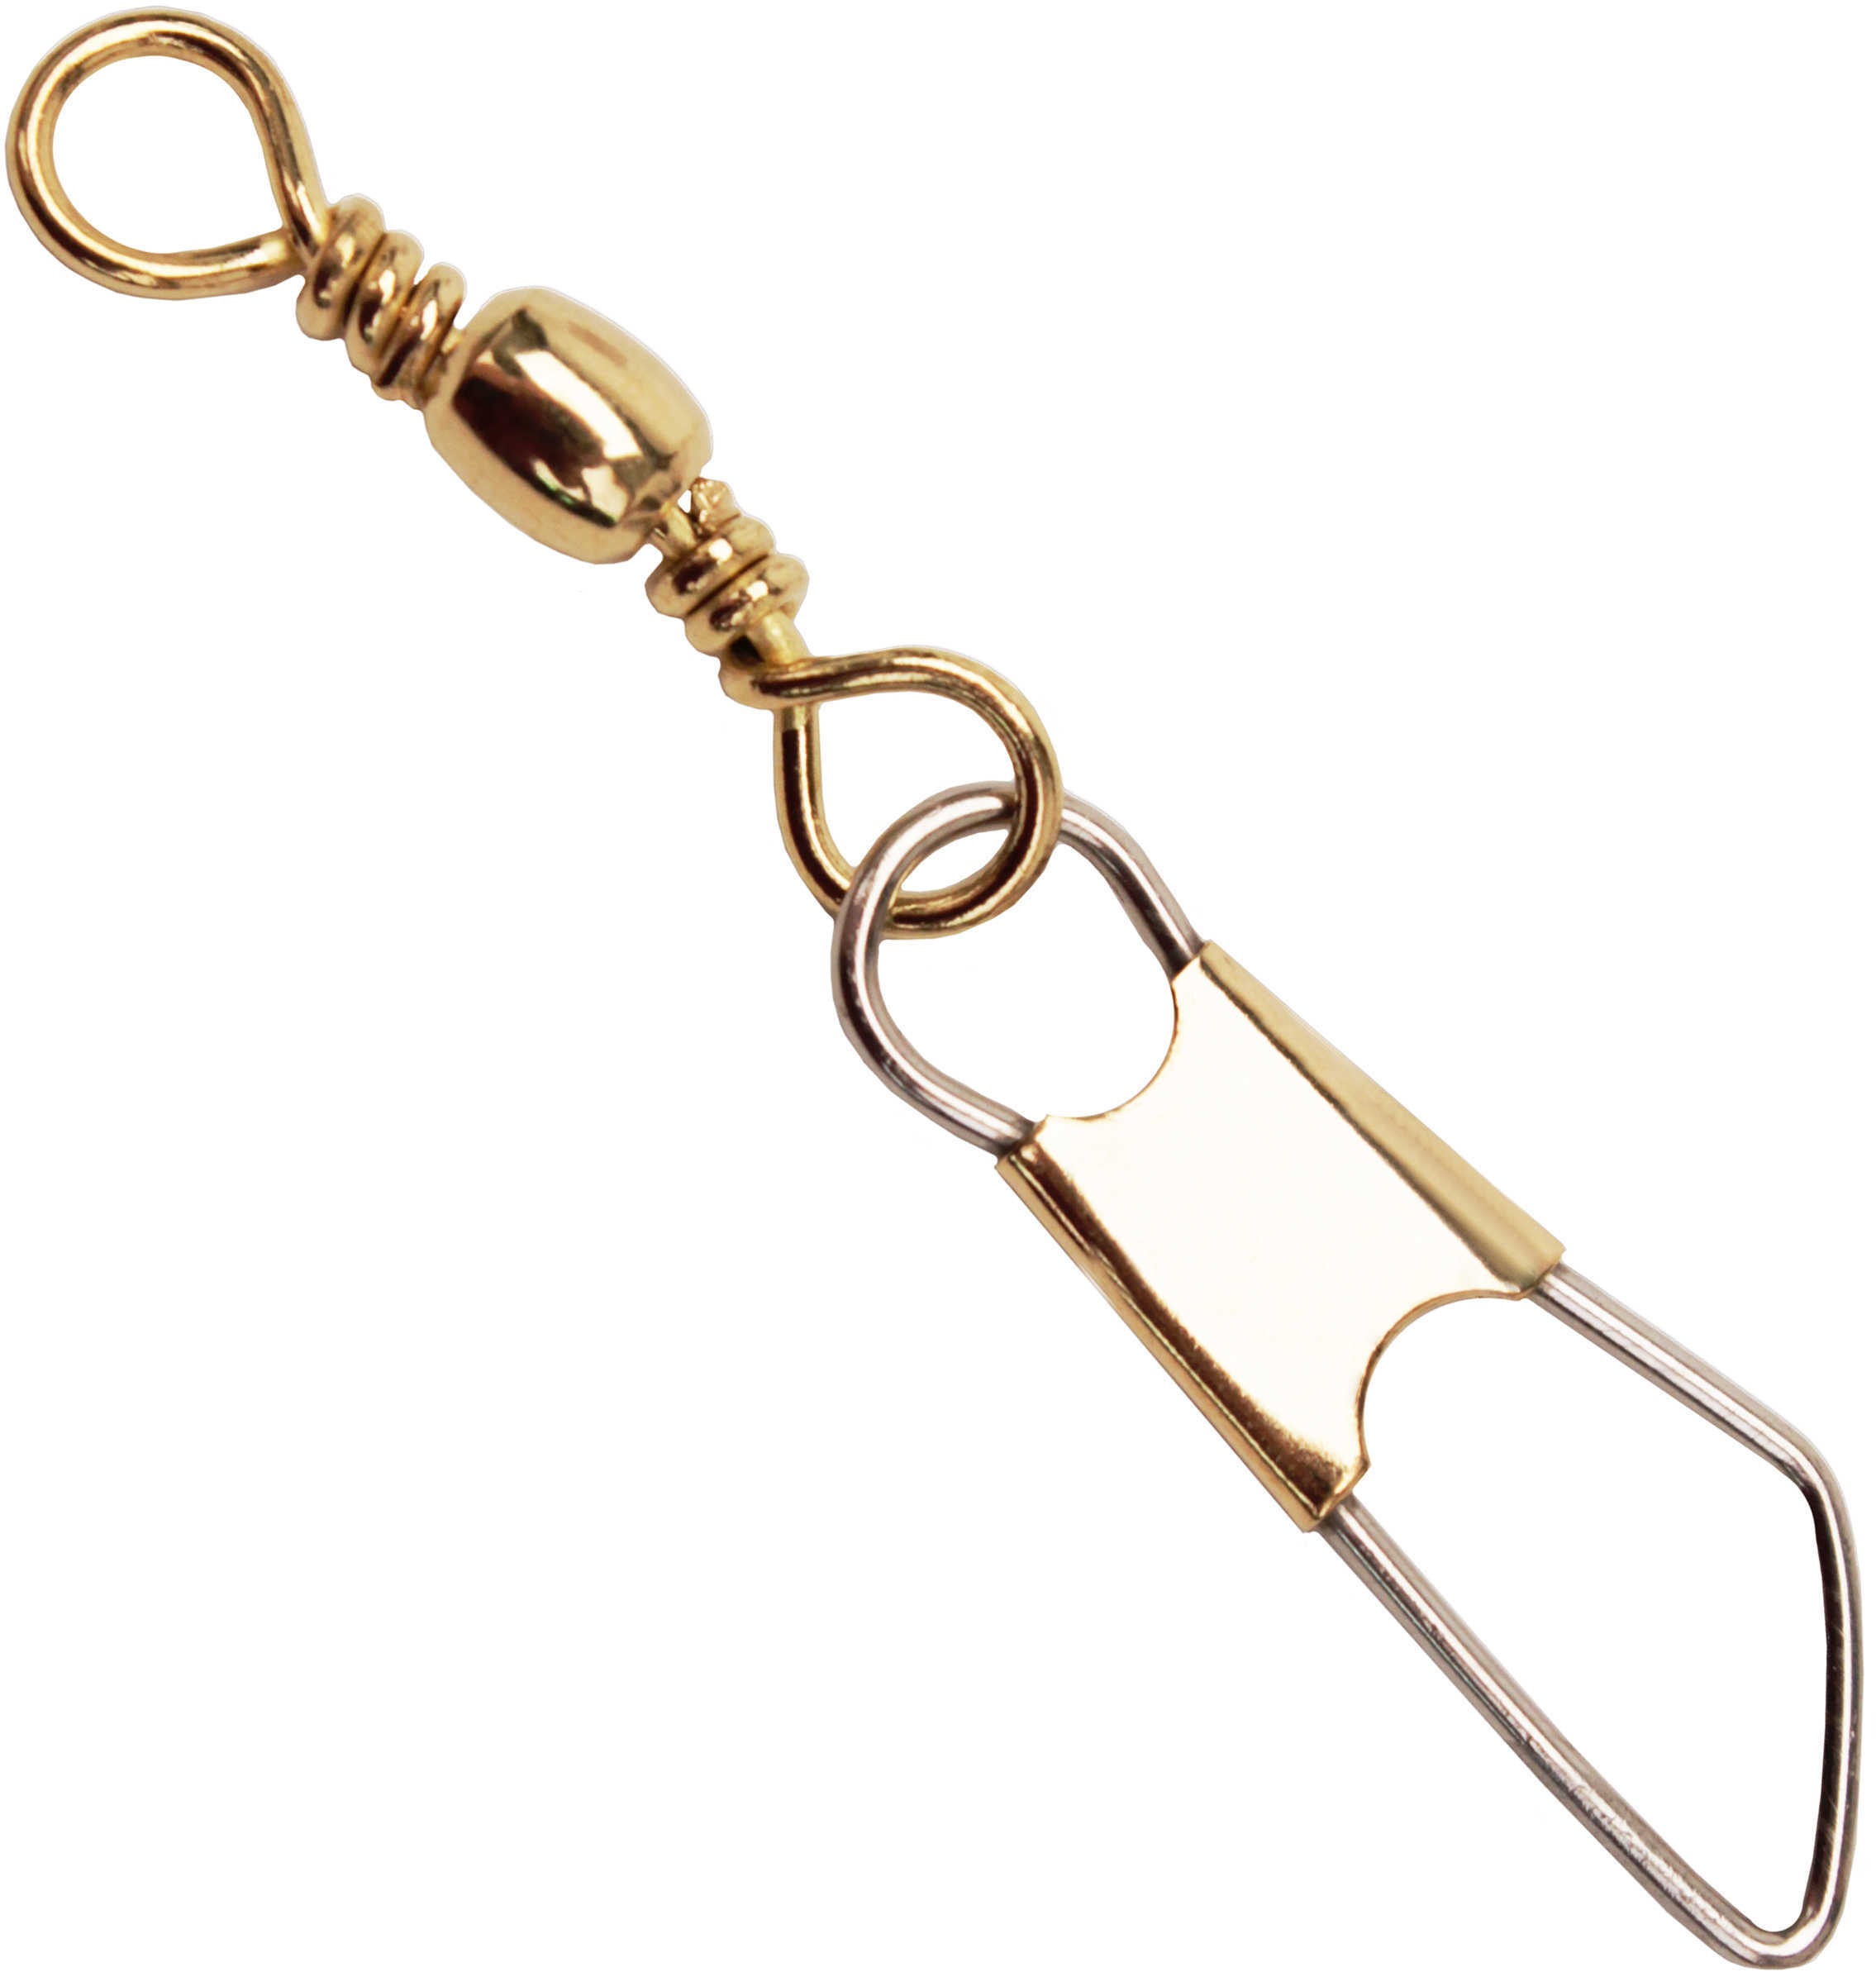 Eagle Claw Fishing Tackle Snap Swivel Brass Size7 6Pk 01041-007